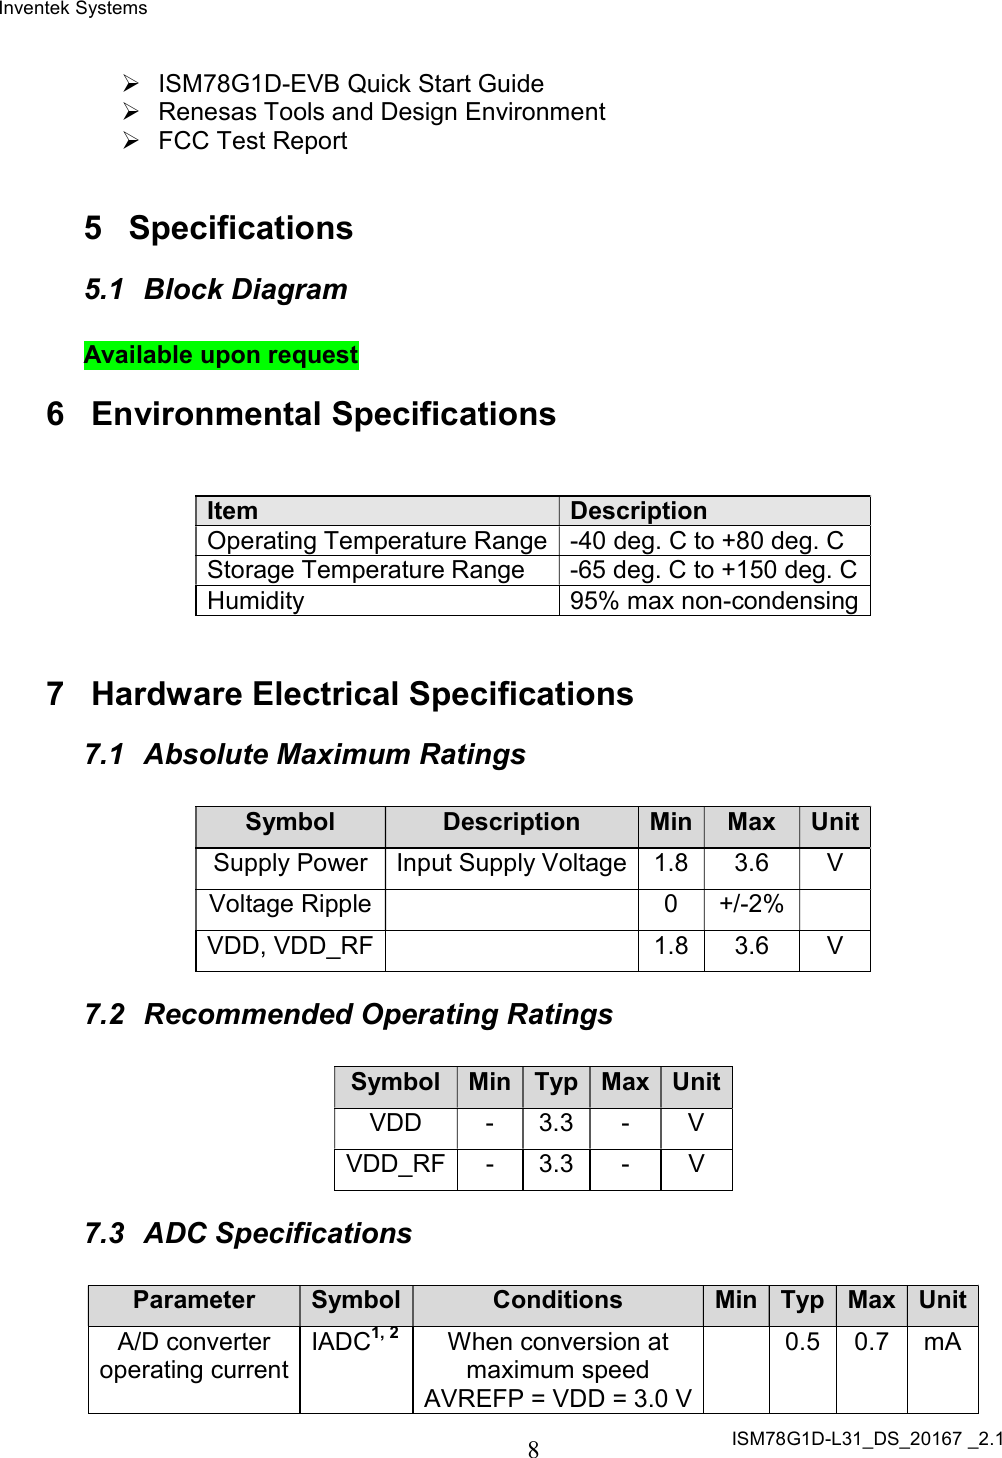 Inventek Systems ISM78G1D-L31_DS_20167 _2.1  8    ISM78G1D-EVB Quick Start Guide   Renesas Tools and Design Environment   FCC Test Report   5  Specifications 5.1  Block Diagram  Available upon request 6  Environmental Specifications   Item Description Operating Temperature Range -40 deg. C to +80 deg. C Storage Temperature Range  -65 deg. C to +150 deg. C Humidity  95% max non-condensing   7  Hardware Electrical Specifications 7.1  Absolute Maximum Ratings  Symbol Description Min Max Unit Supply Power  Input Supply Voltage 1.8  3.6  V Voltage Ripple   0  +/-2%   VDD, VDD_RF   1.8 3.6  V 7.2  Recommended Operating Ratings  Symbol Min Typ Max Unit VDD  -  3.3  -  V VDD_RF -  3.3  -  V 7.3  ADC Specifications  Parameter Symbol Conditions Min Typ Max Unit A/D converter operating current IADC1, 2 When conversion at maximum speed AVREFP = VDD = 3.0 V   0.5  0.7  mA 